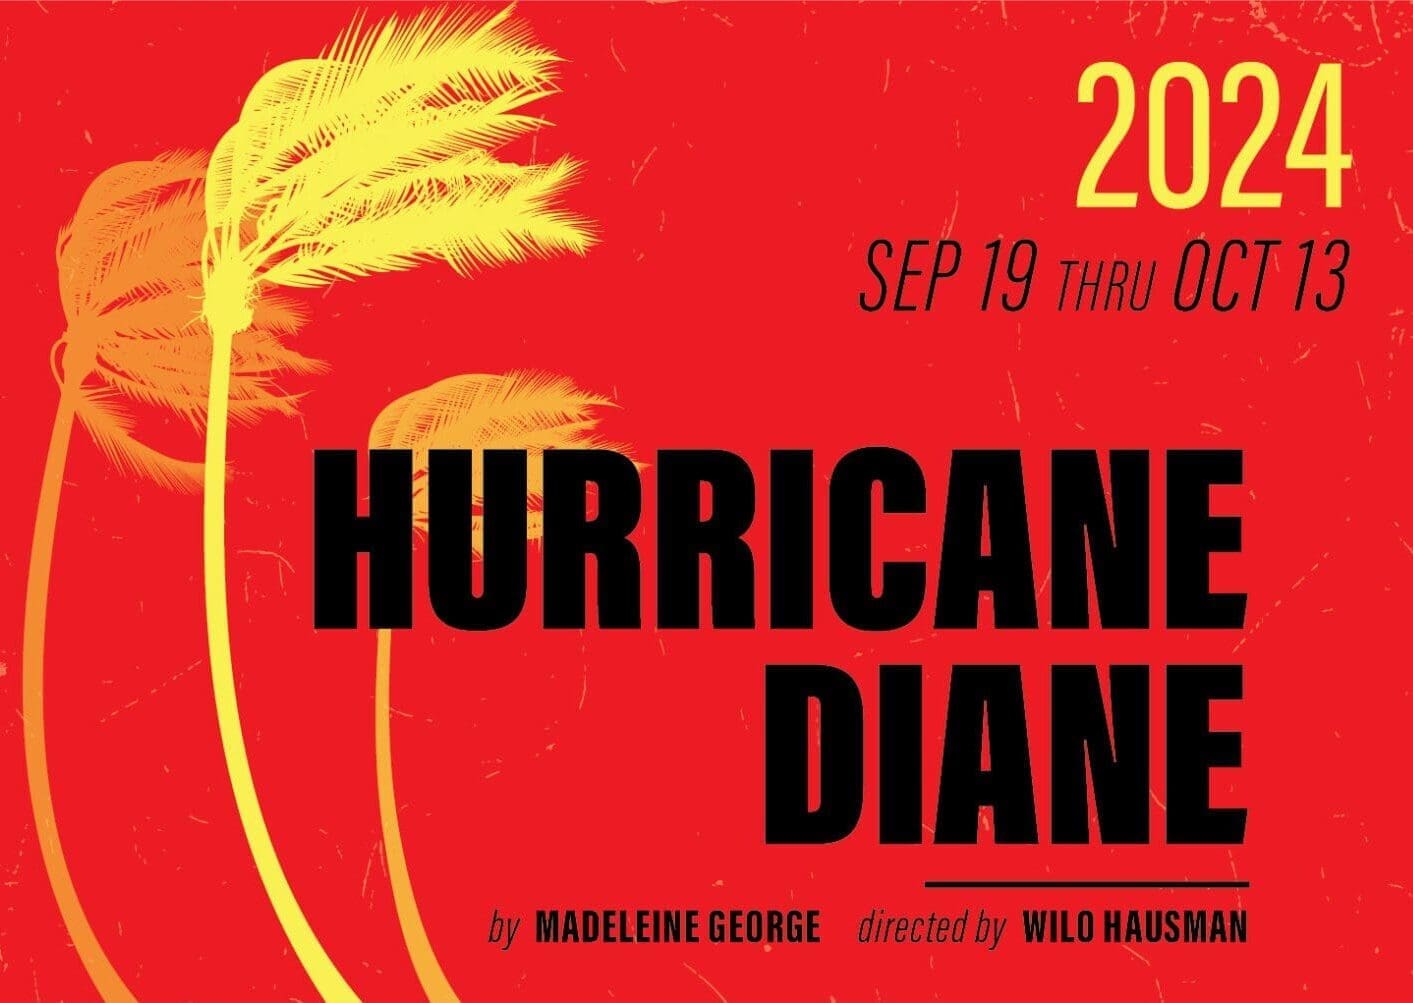 HURRICANE DIANE by Madeleine George; directed by Willo Hausman